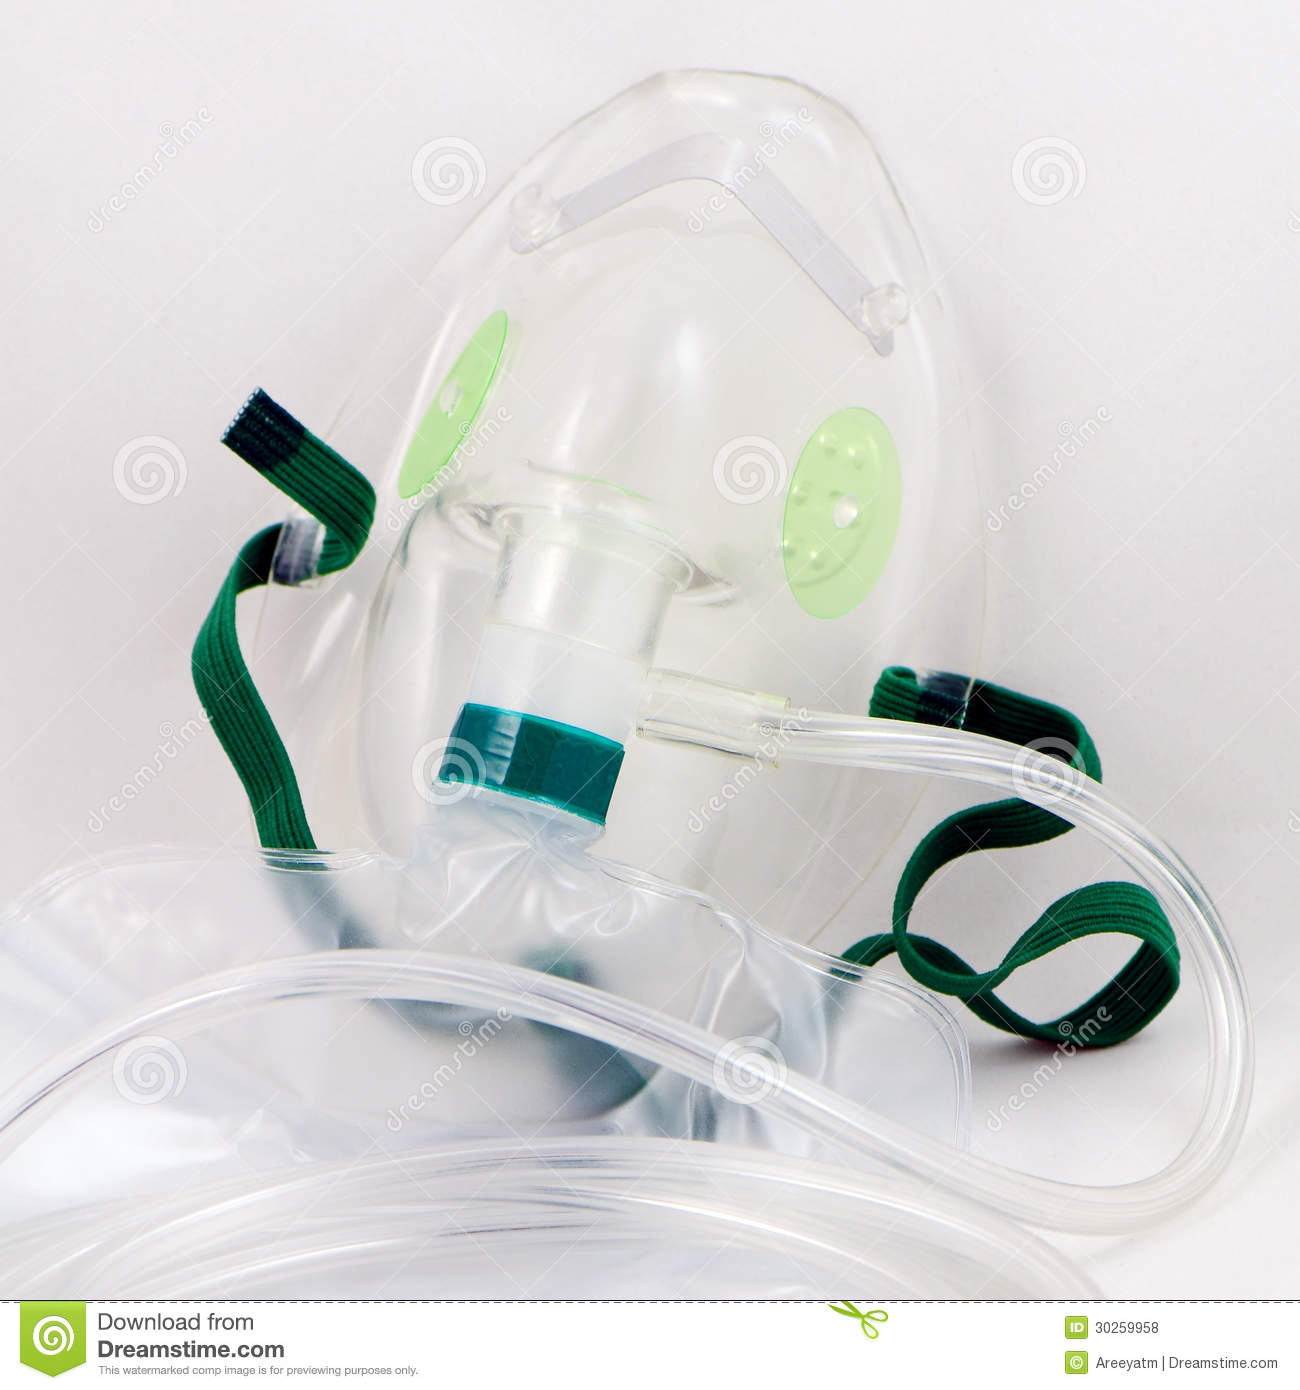 Oxygen Mask With Bag  Royalty Free Stock Photos   Image  30259958